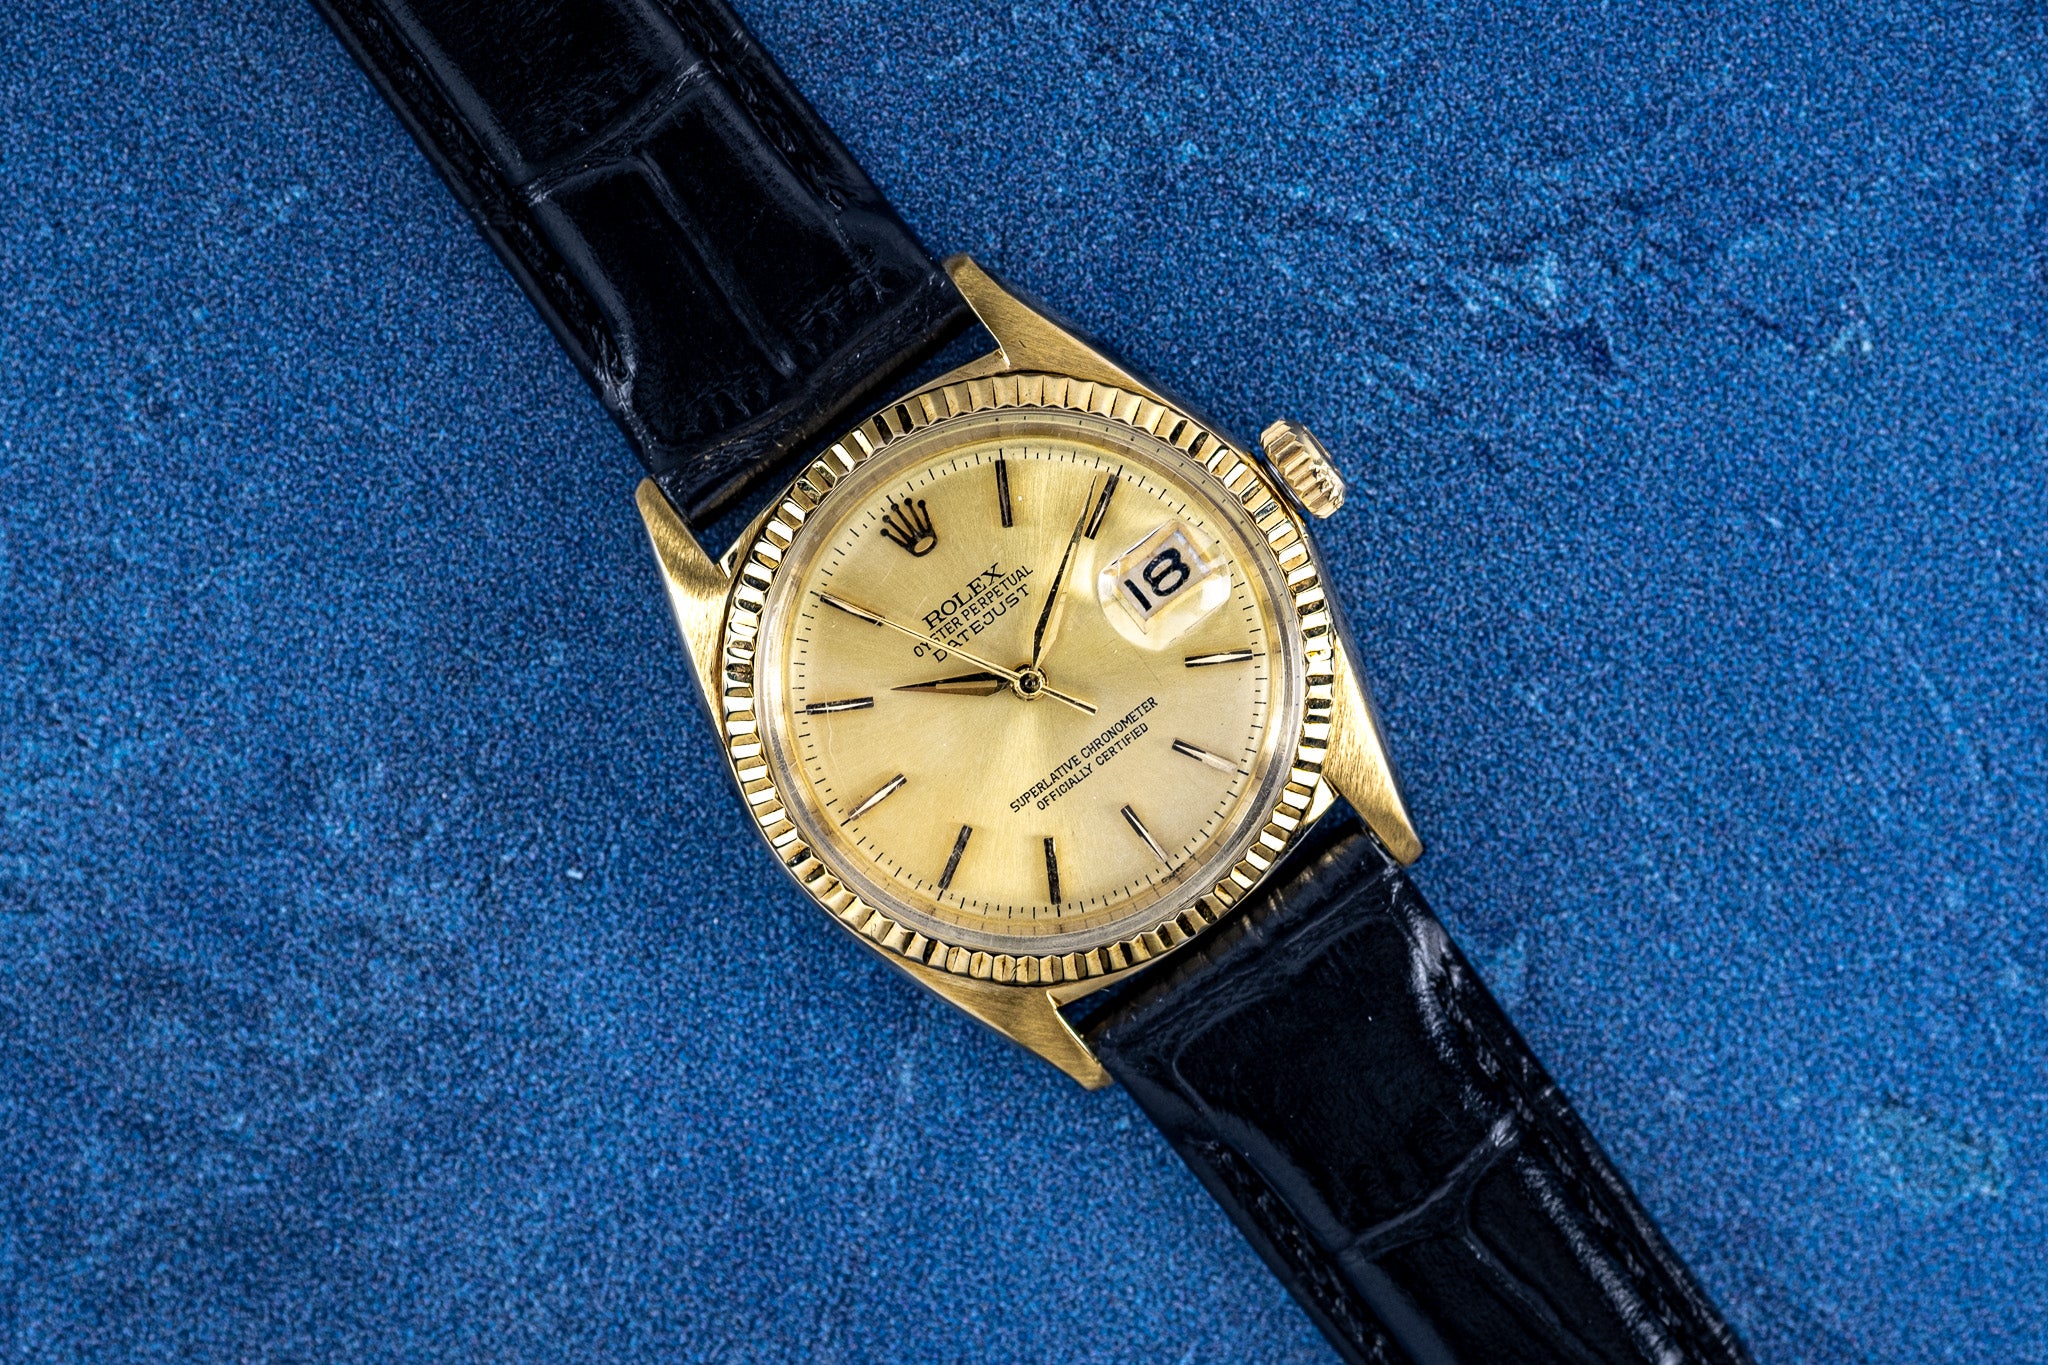 1964 Rolex Oyster Perpetual Datejust 1601 in 18K Gold